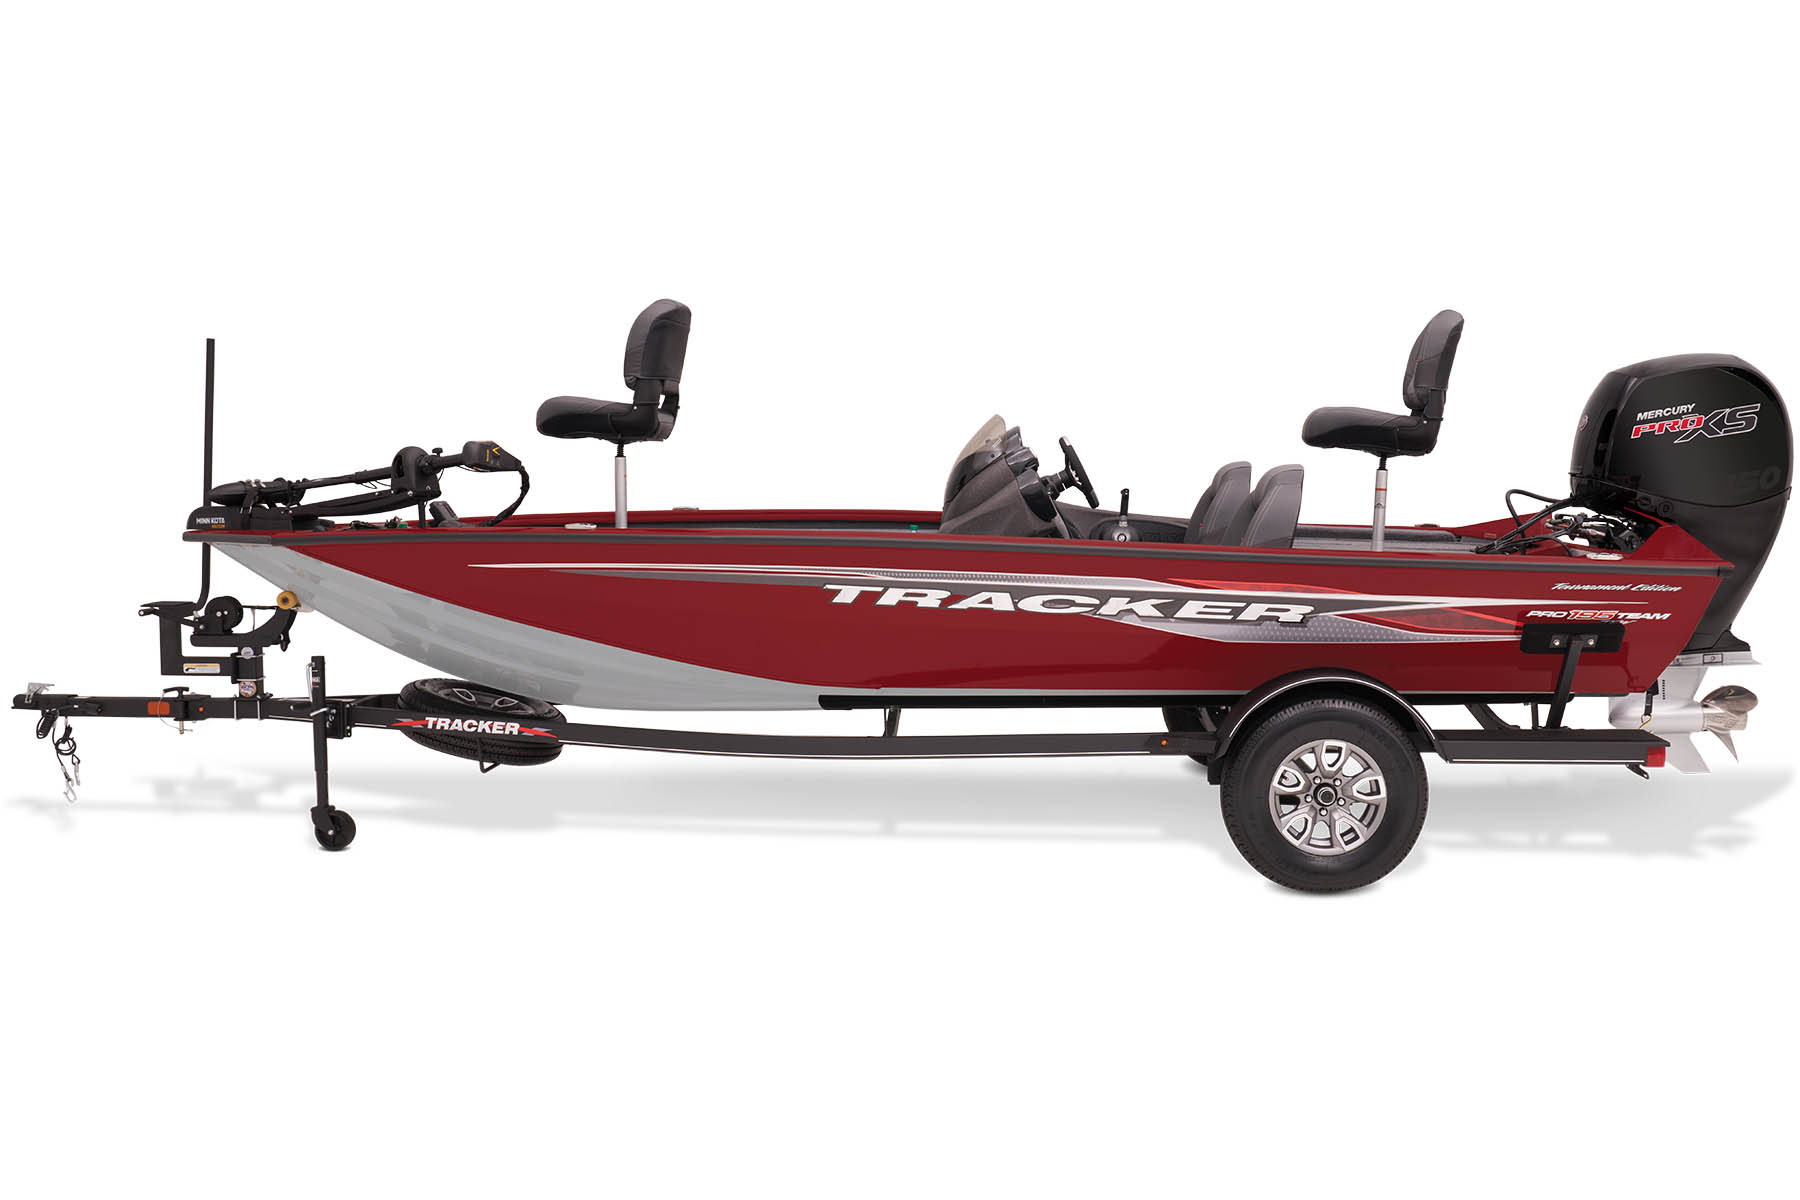 TRACKER® Boats at Bass Pro and Cabela's Boating Centers